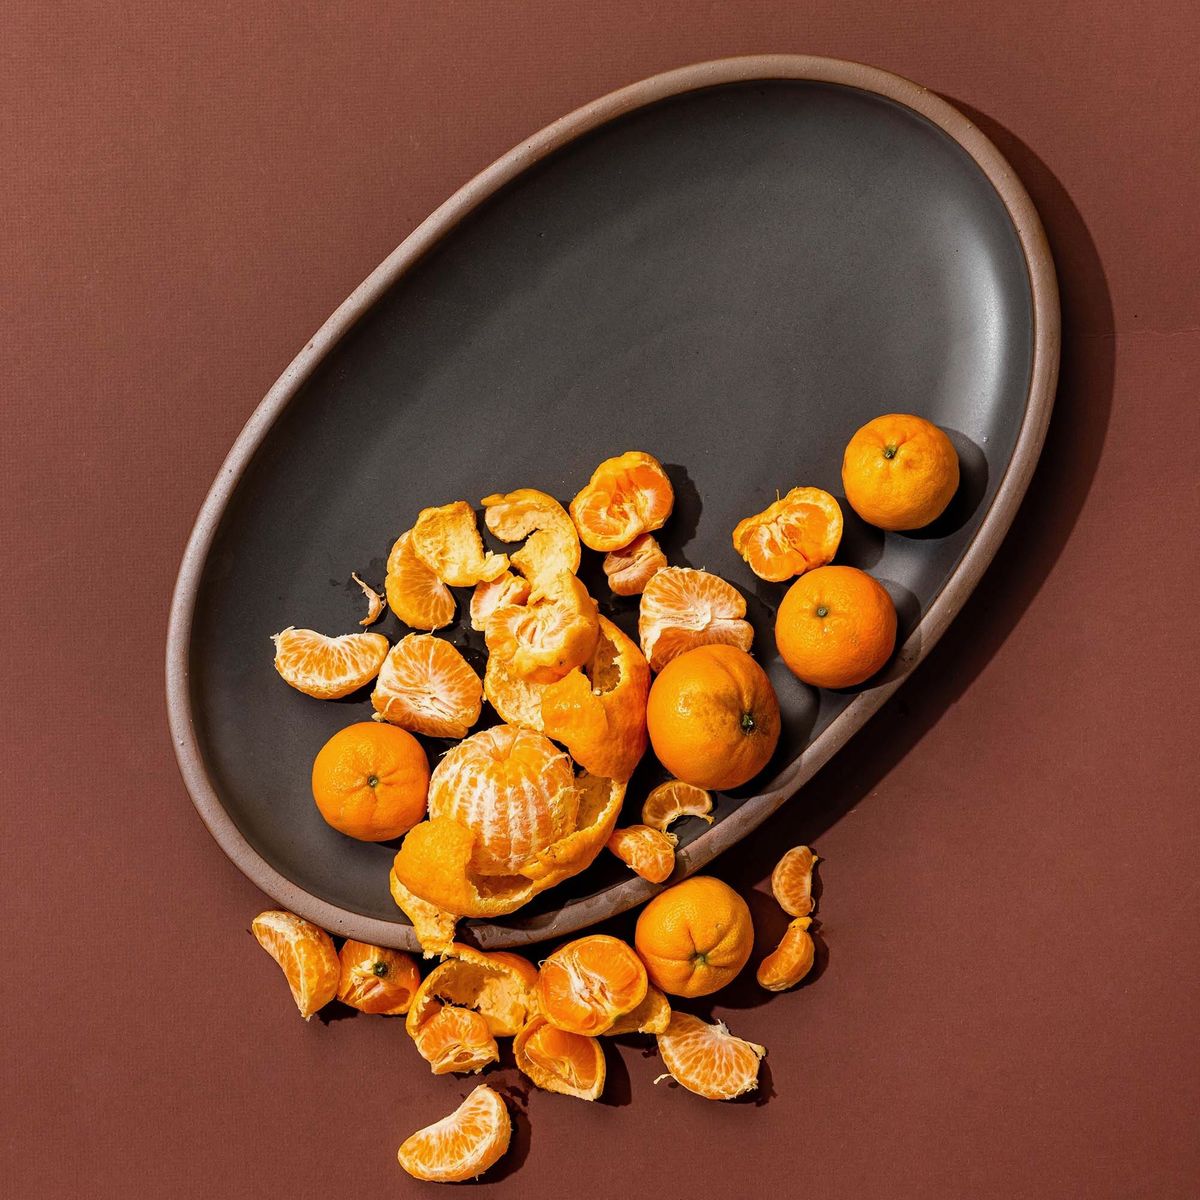 A large oval ceramic platter in a cool, medium grey color featuring iron speckles and an unglazed rim - styled with citrus fruits on a charcoal background